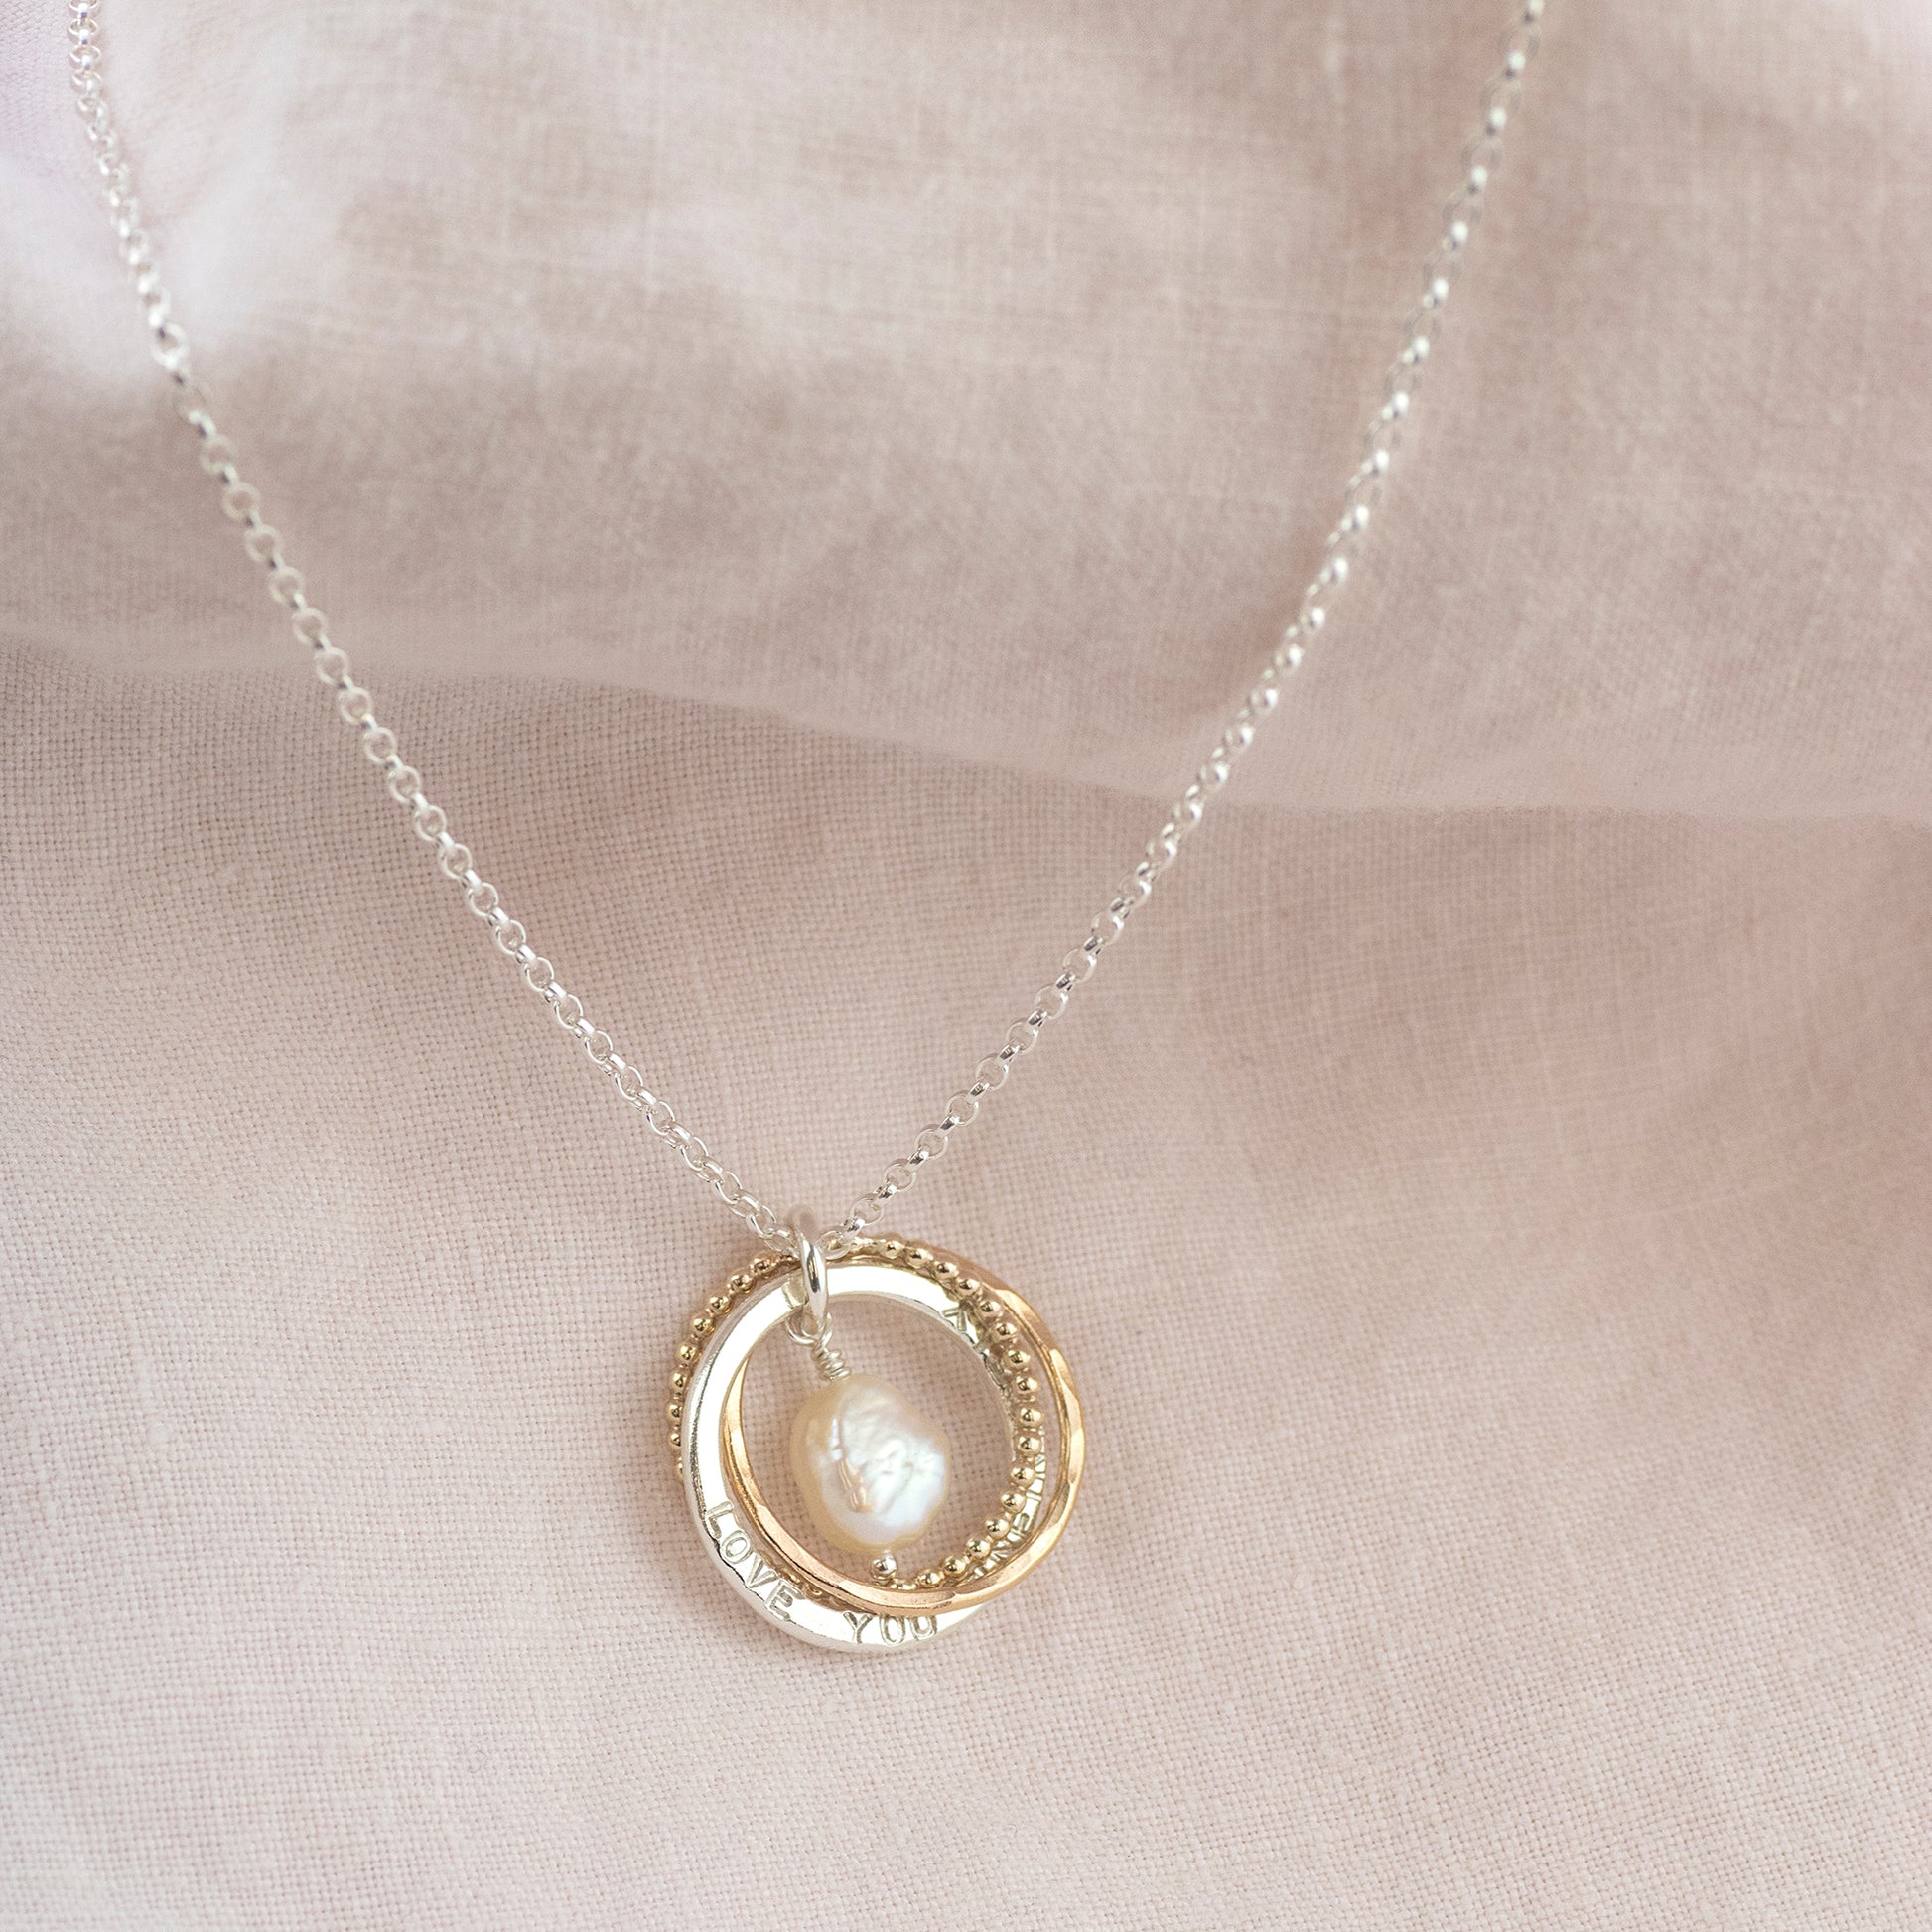 30th Wedding Anniversary Gift - Personalised 9kt Gold Pearl Wedding Anniversary Necklace